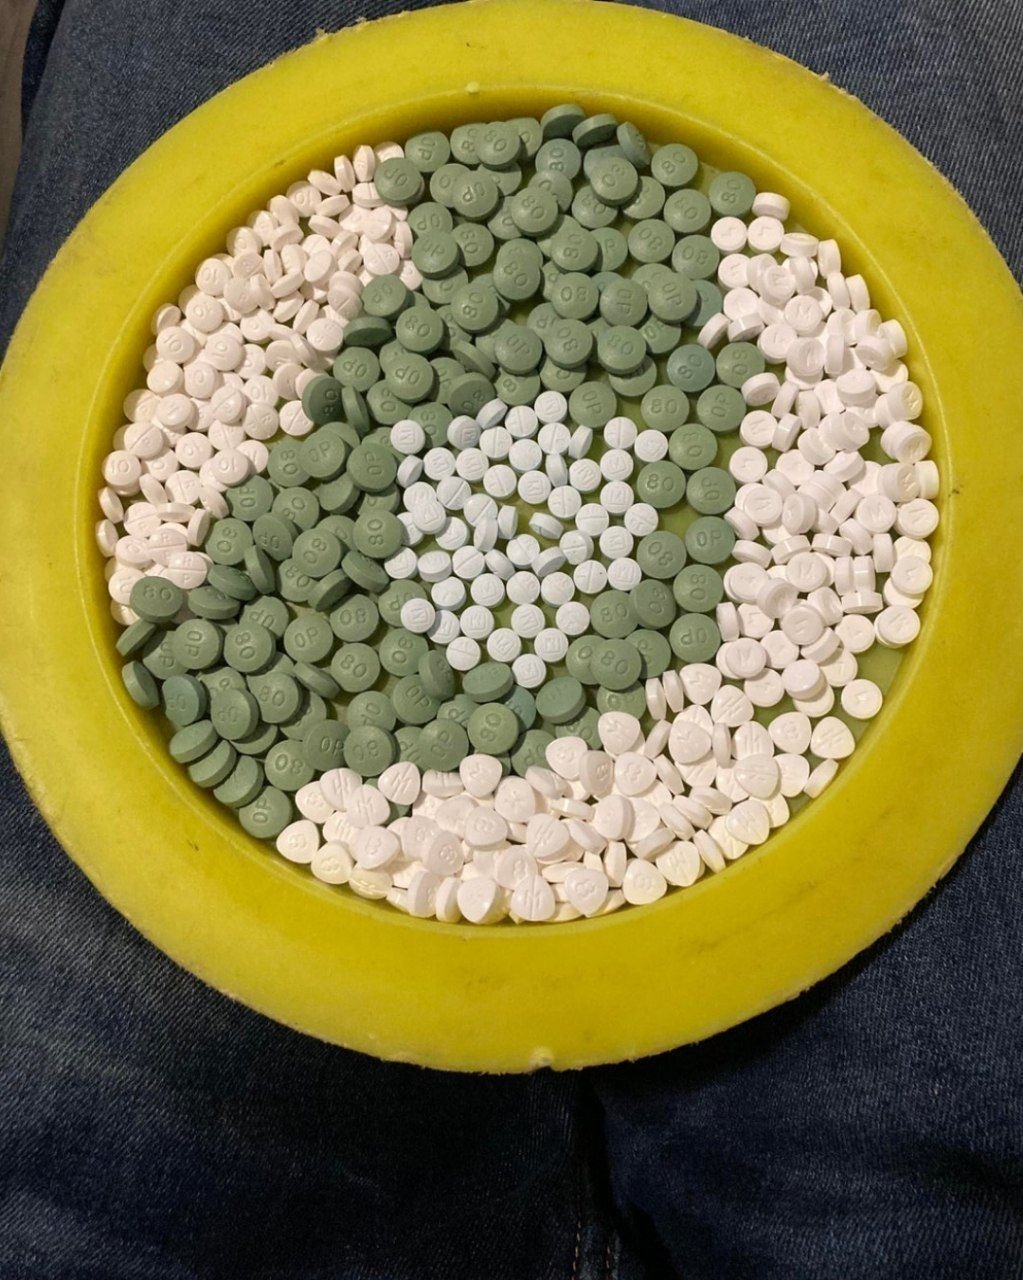 ASSORTED PAIN & ANXIETY MEDS- ,XANAX 2mg,OXY,PERCS